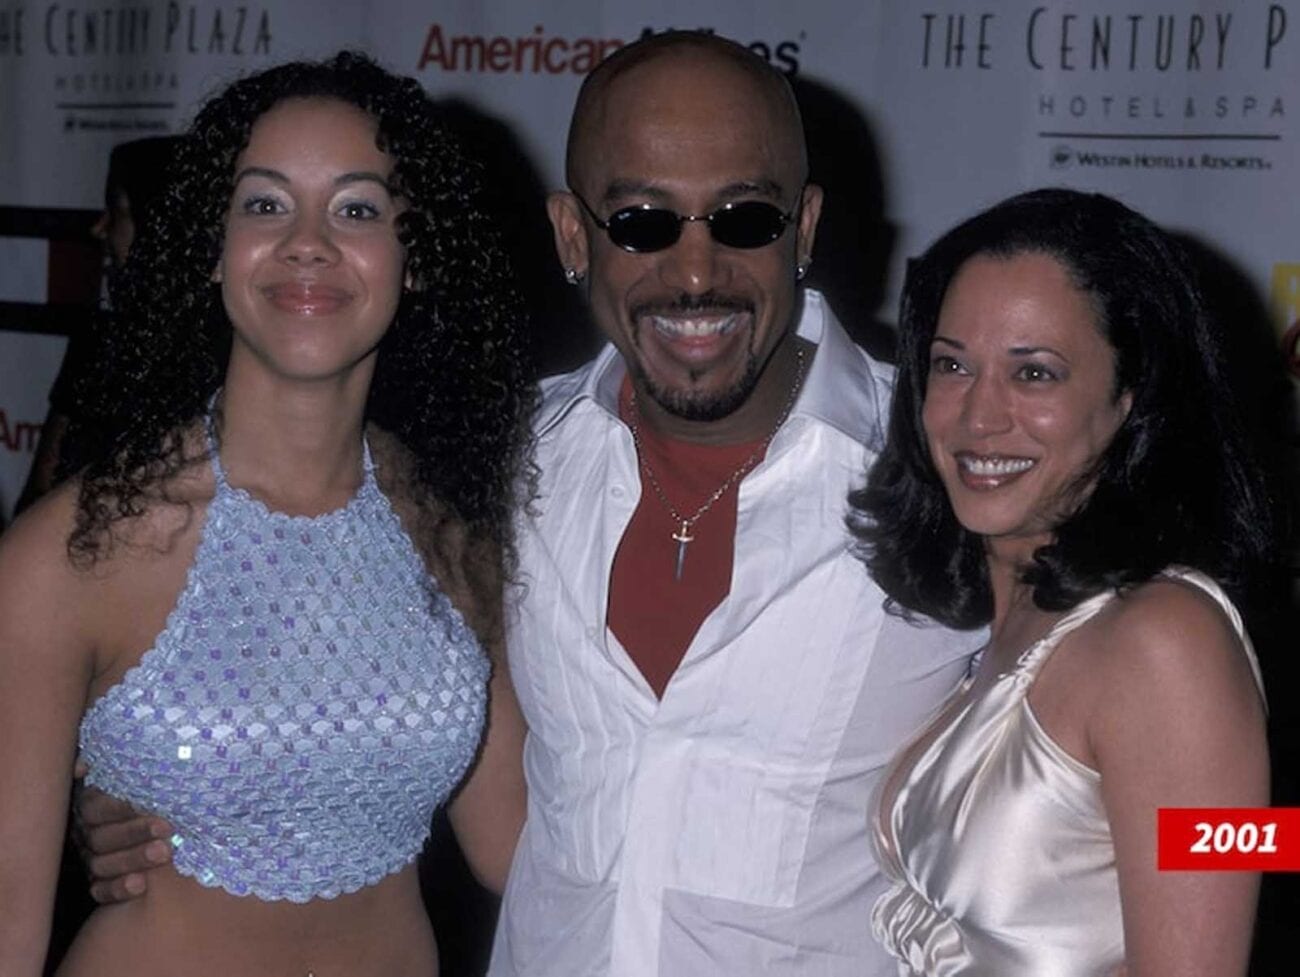 Kamala Harris is the assumed VP-elect, so it surprised some when they found out she used to date the talk show host Montel Williams.